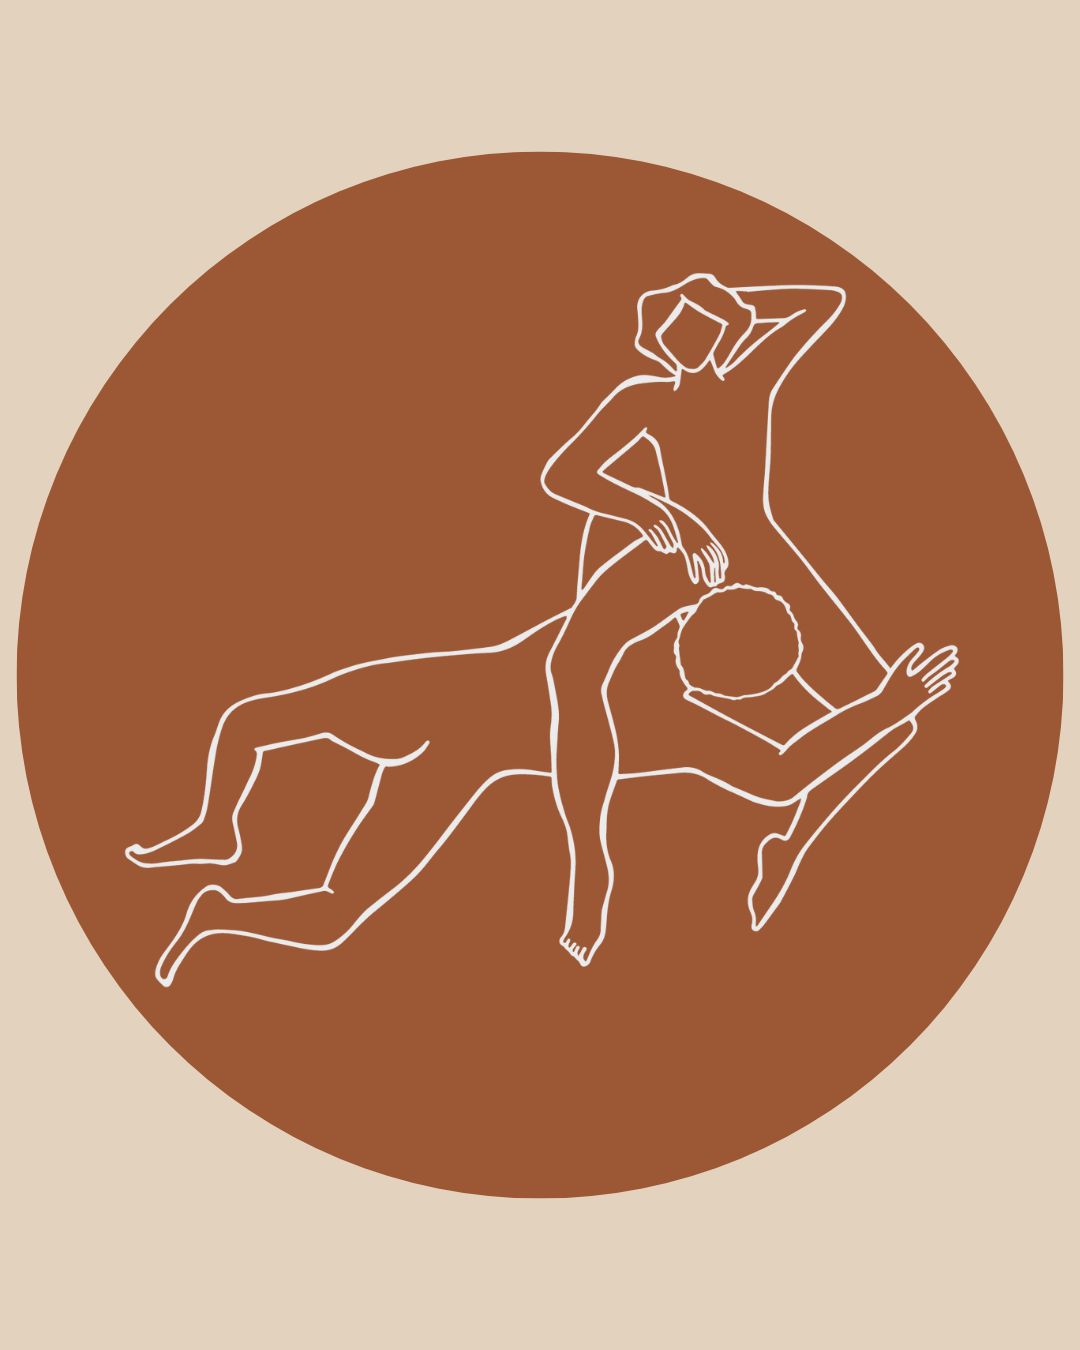 Illustration of the Kivin Method from "Smart Sex" in a burnt orange circle on a beige background.